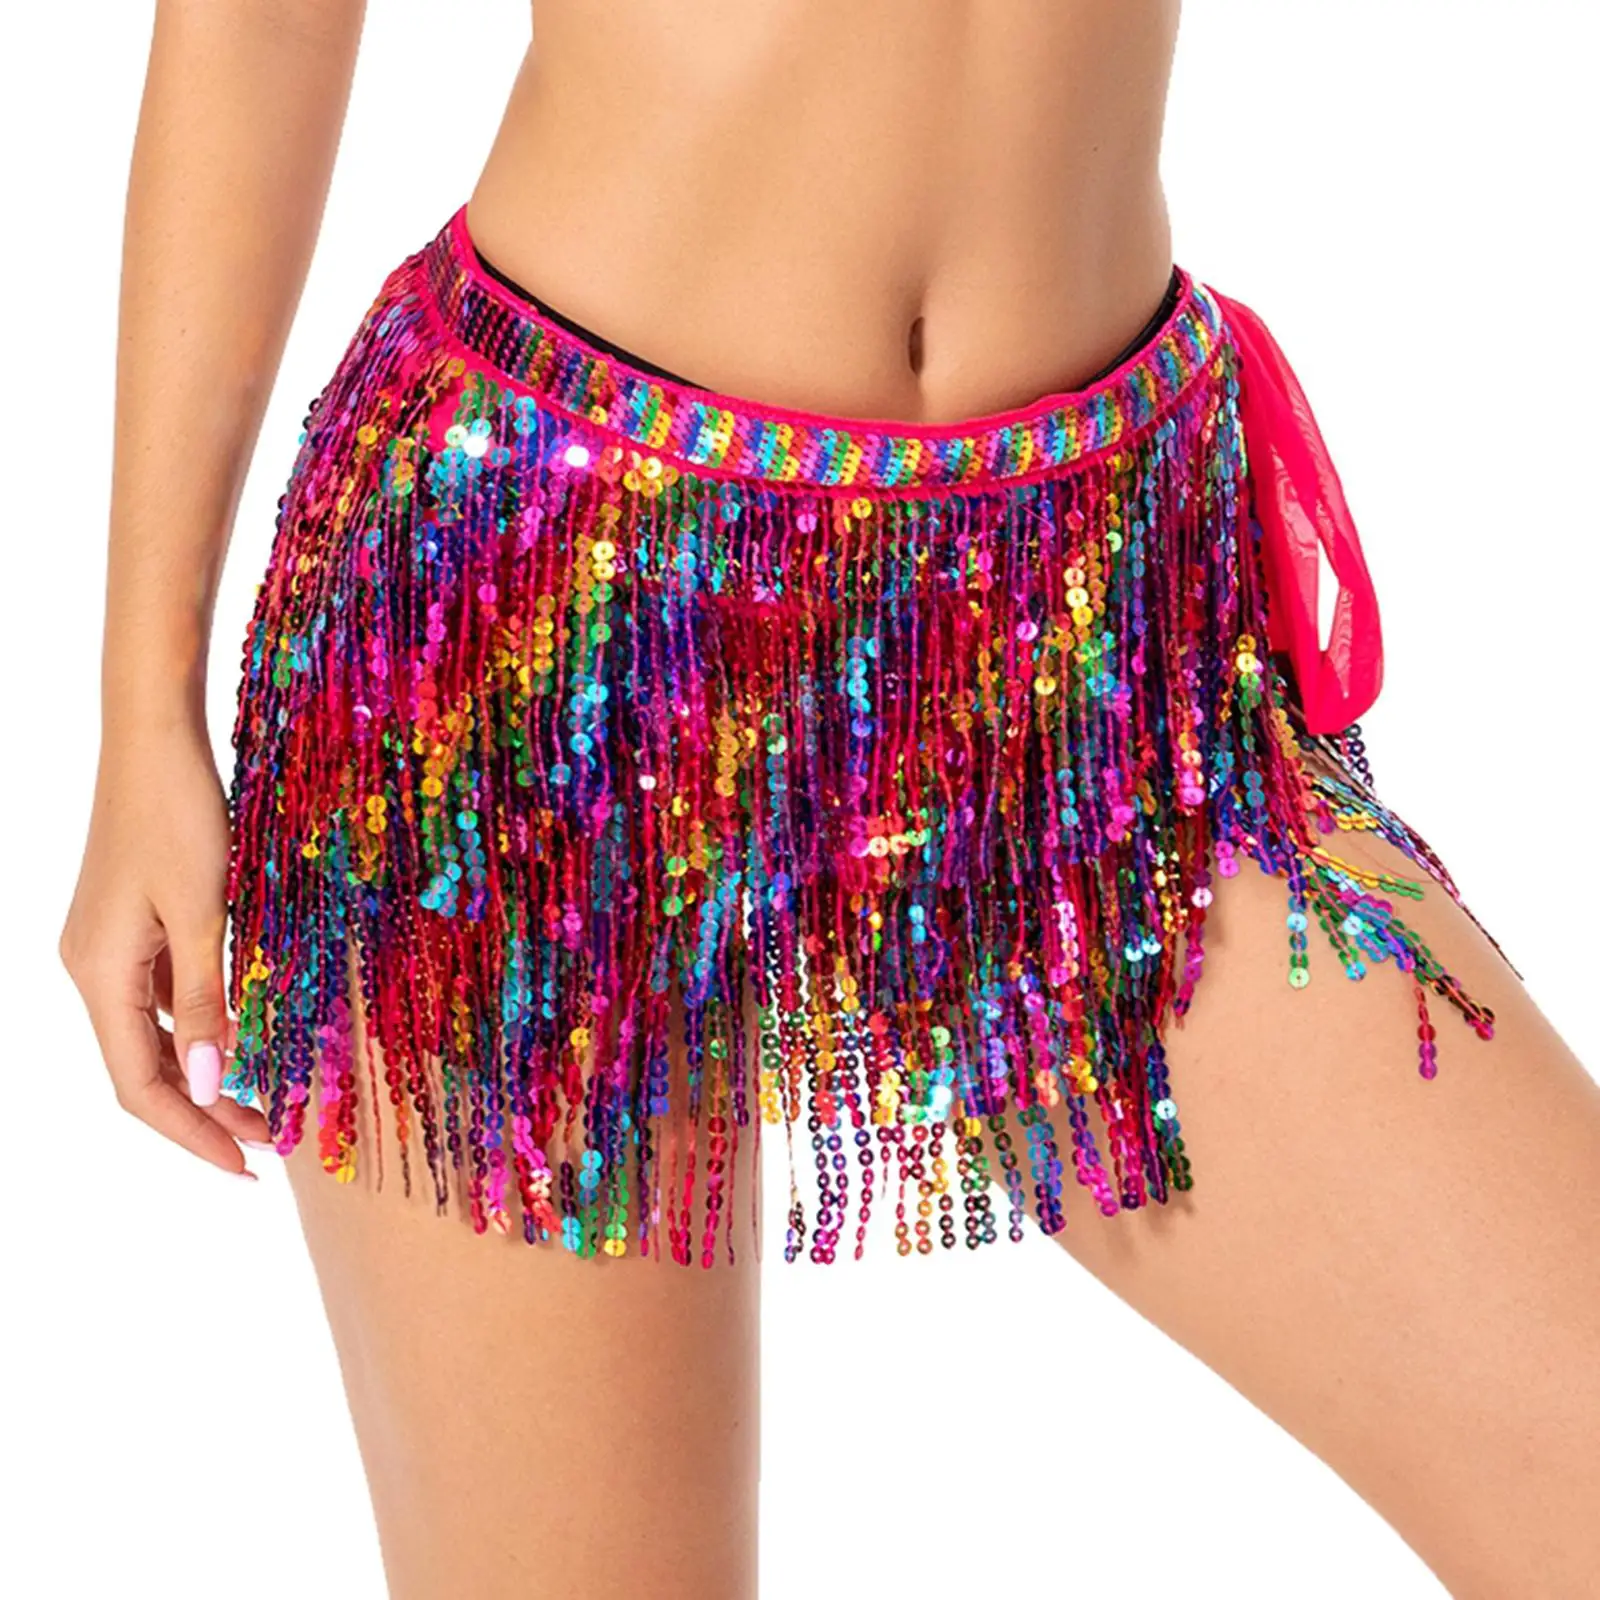 Women Belly Dance Skirt Festival Party Costume Performance Skirt for Costume Accessories Dancing Practicing Samba Cha Cha Women